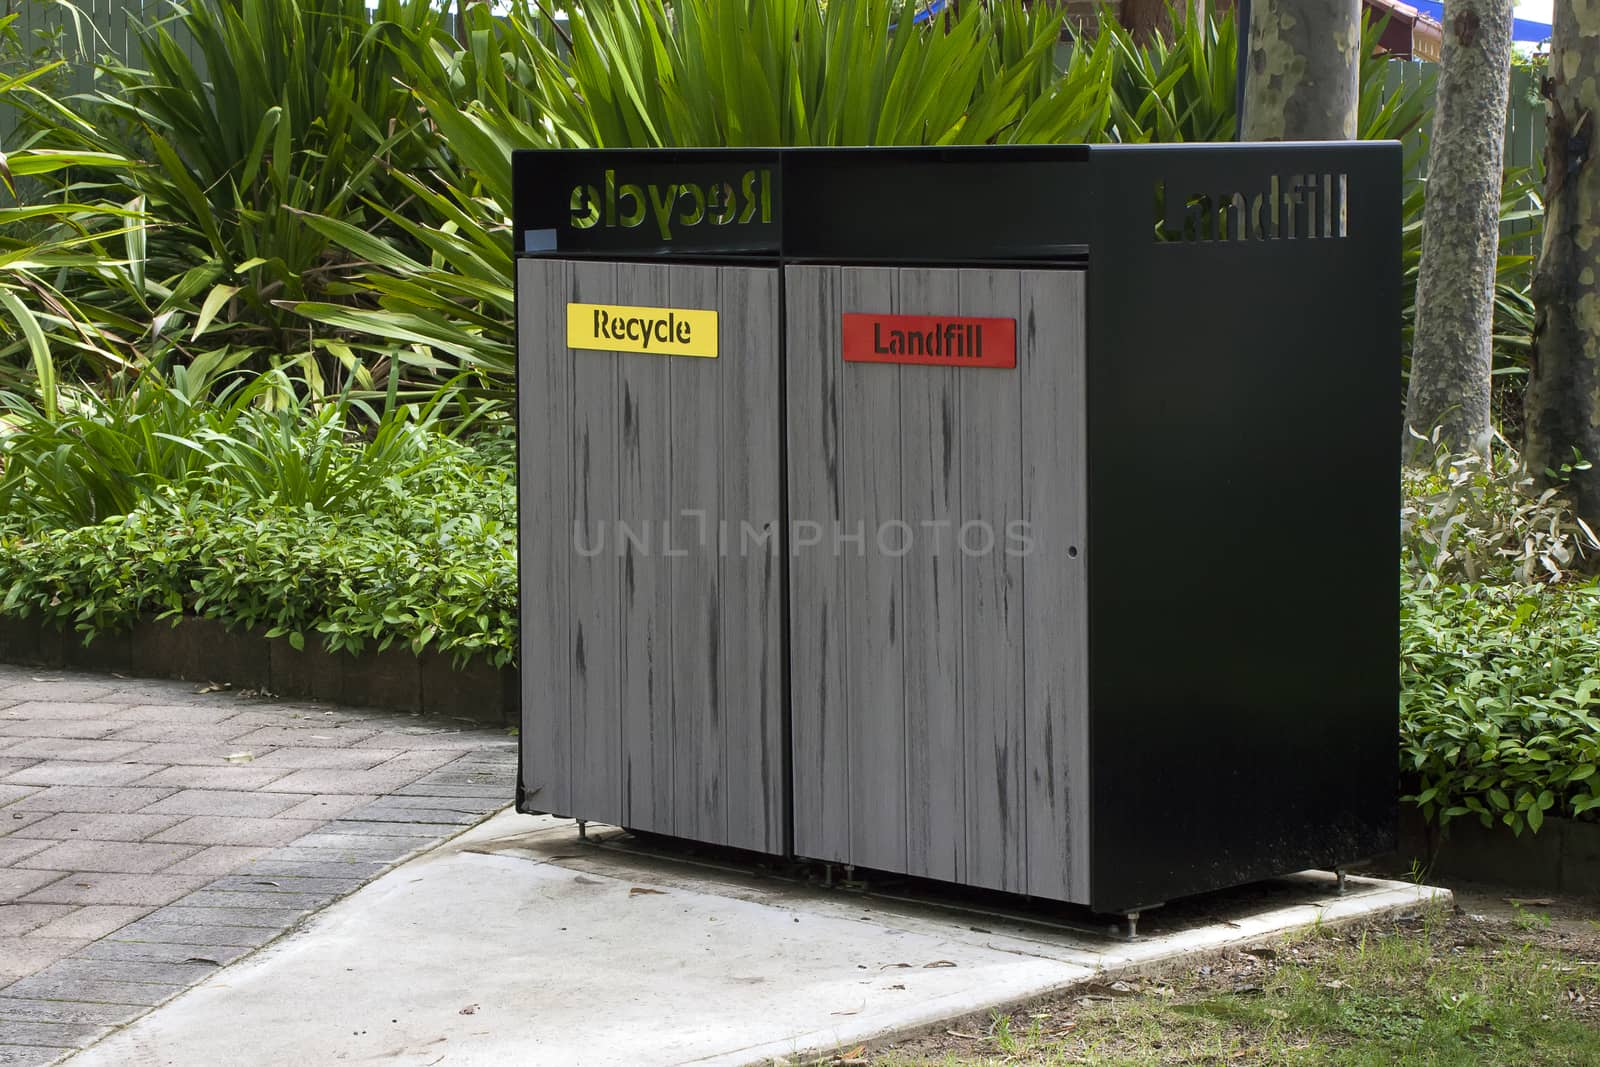 Waste bins enclosure for recycled waste and for landfill in a public park